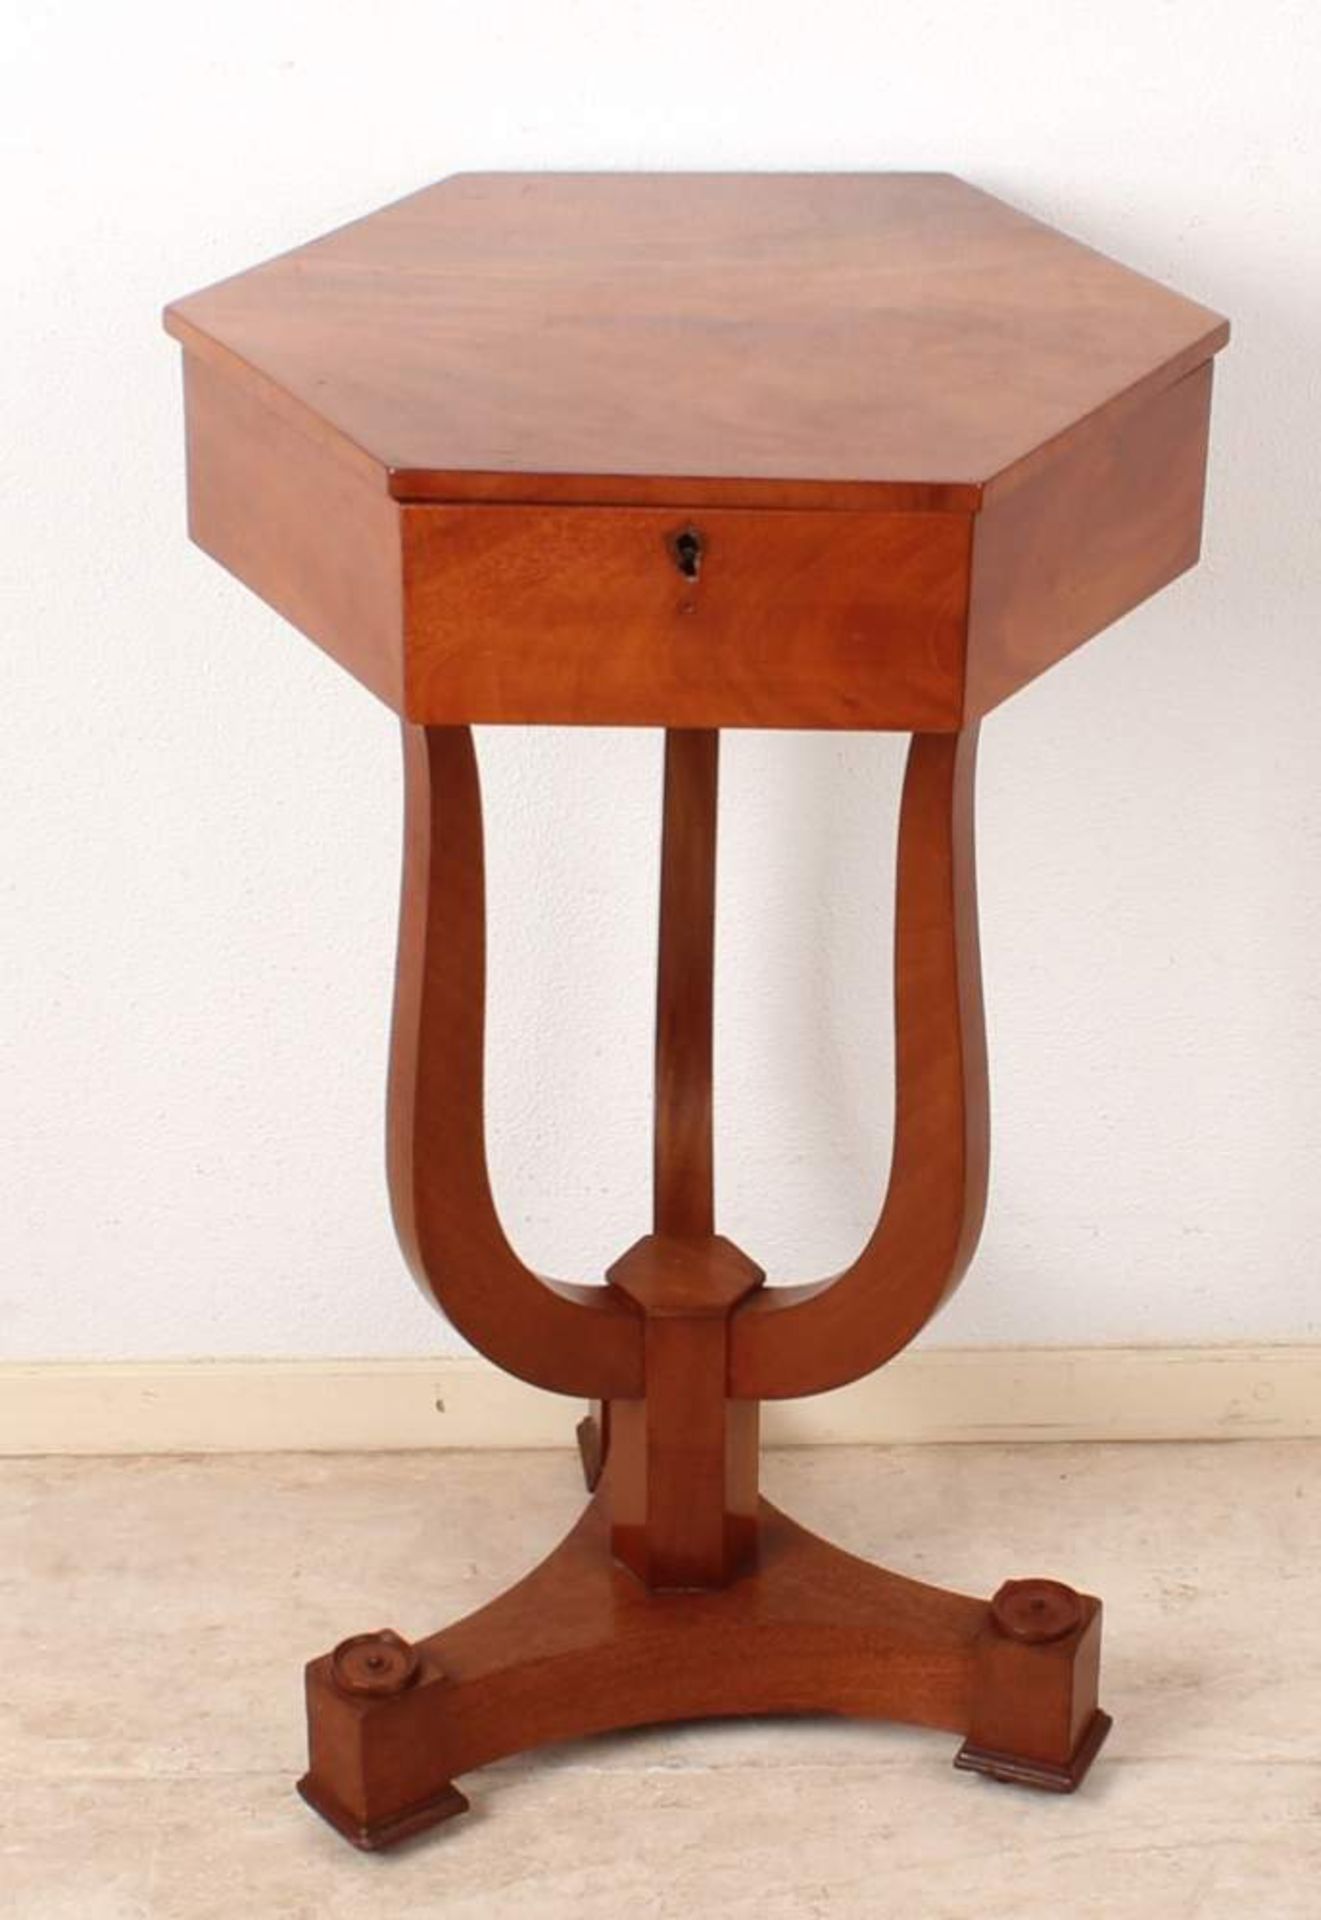 Antique German Biedermeier style sewing table with 6 angled sewing area around 1900, mahogany,